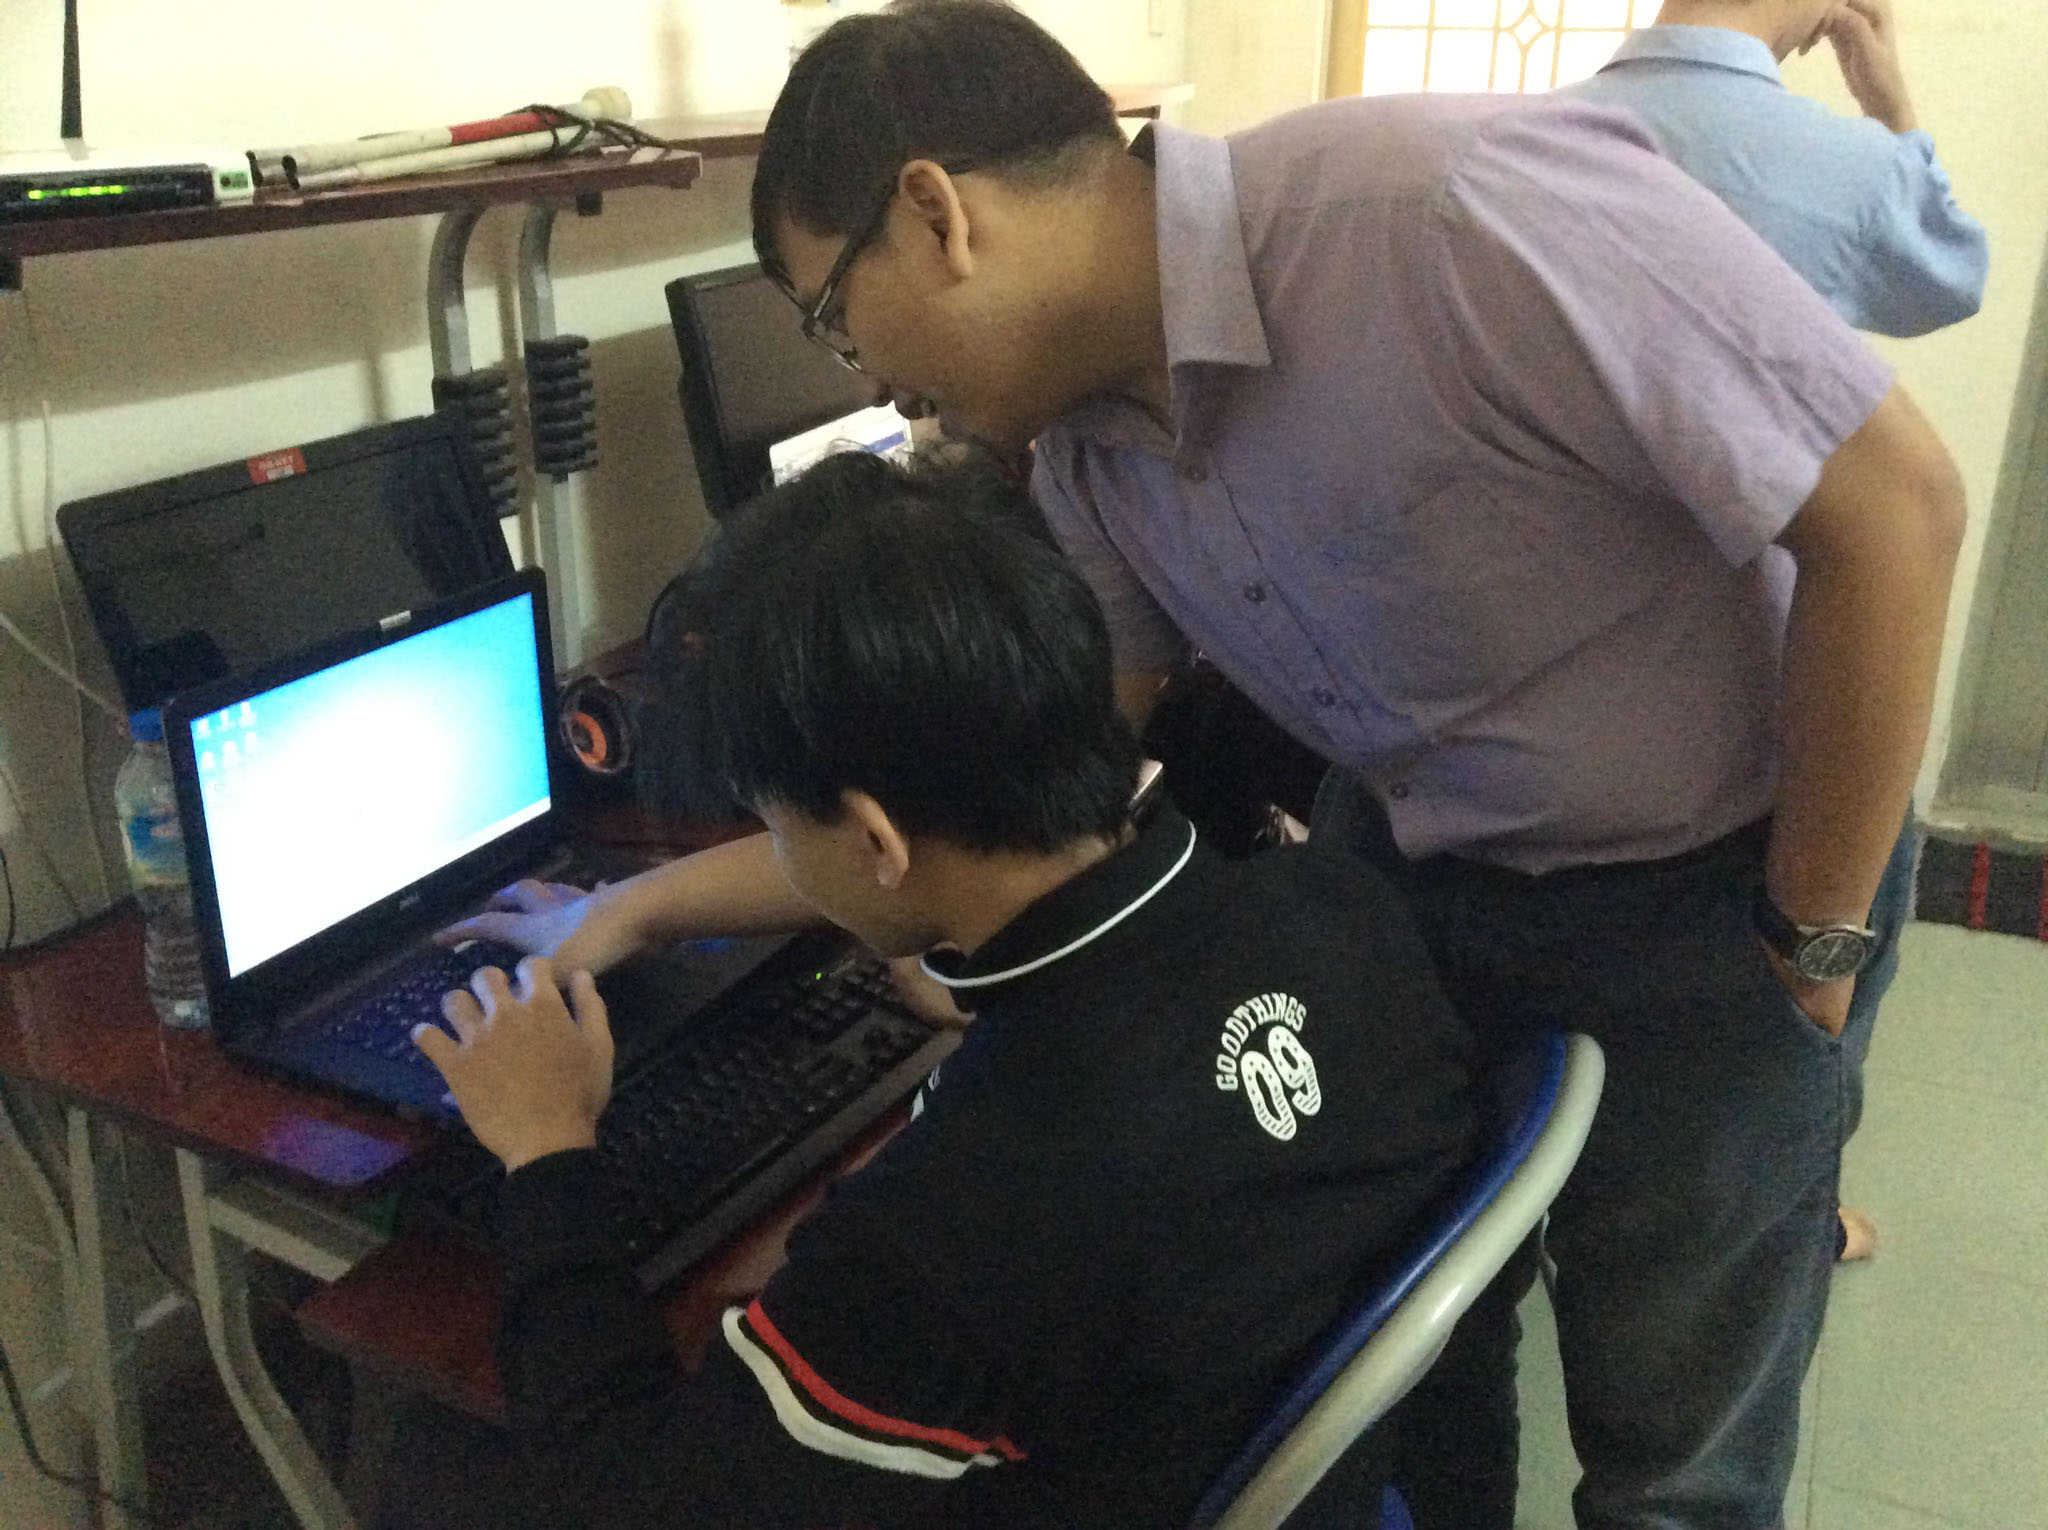 Mr. Vinh is instructing one of the trainees